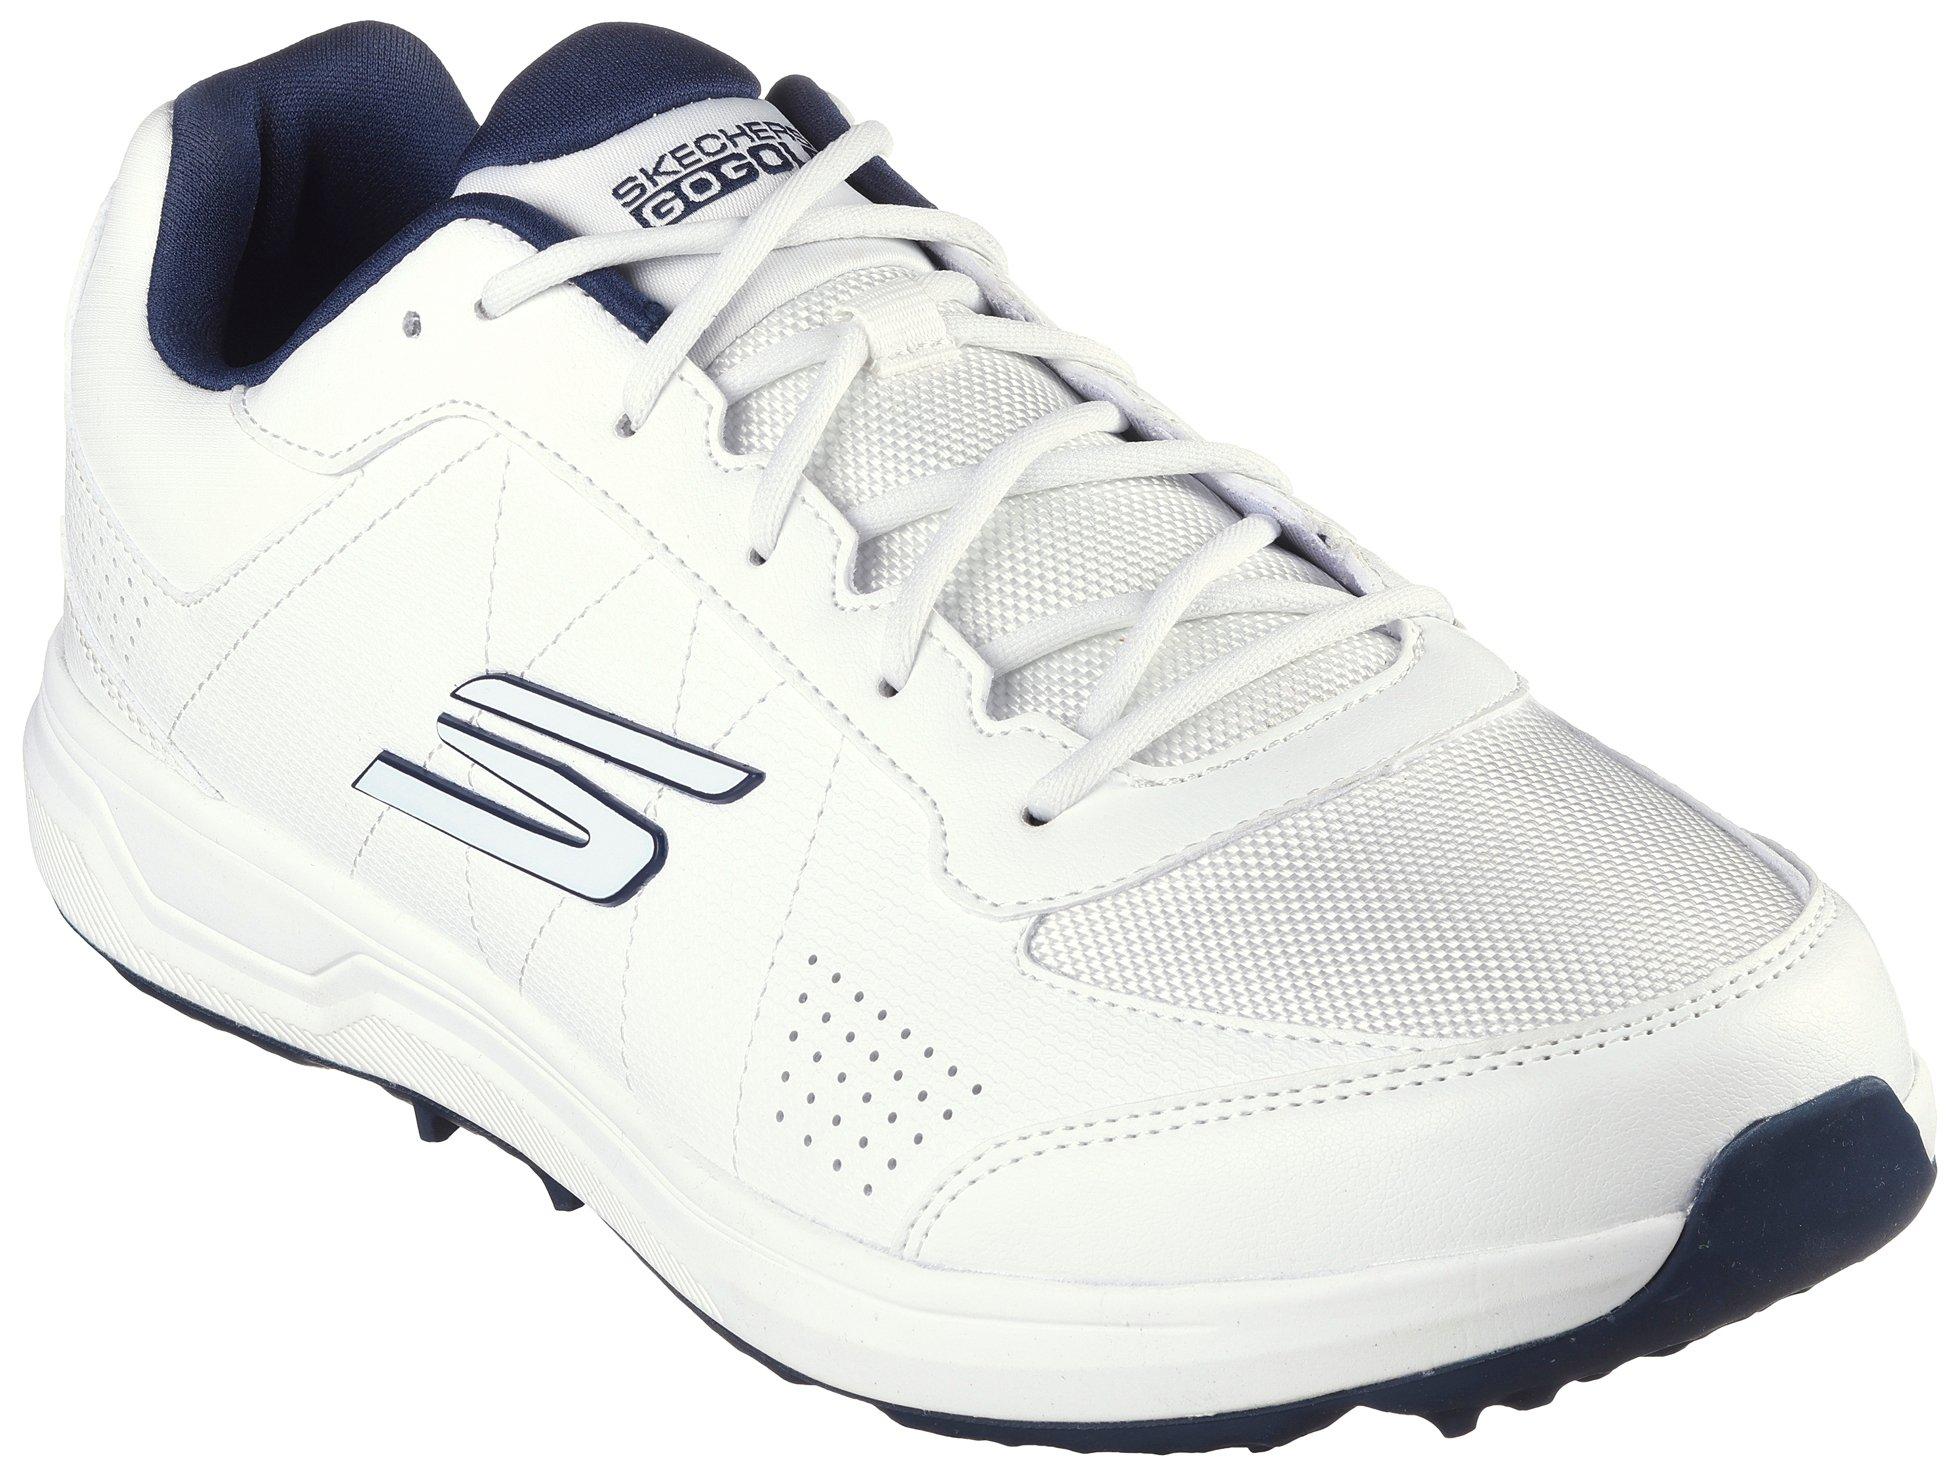 Skechers Mens Relaxed Fit GO Golf Prime Golf Shoes